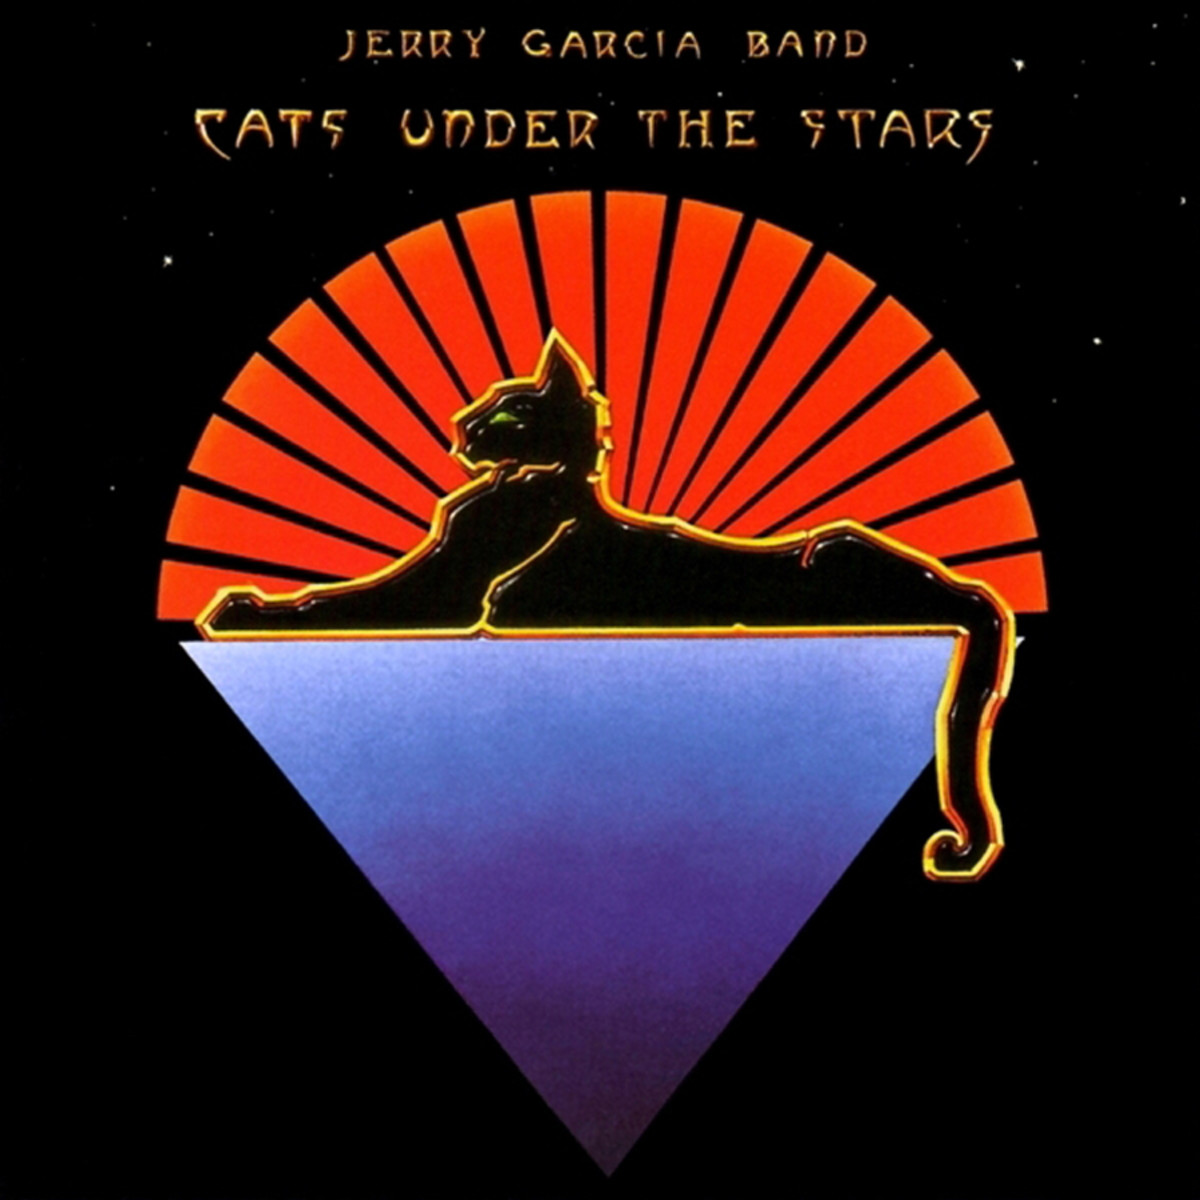 Jerry Garcia Band "Cats Under the Stars" Arista Records AB-4160 12" LP Vinyl Record (1978) Album Cover Art by Alton Kelley & Stanley Mouse 